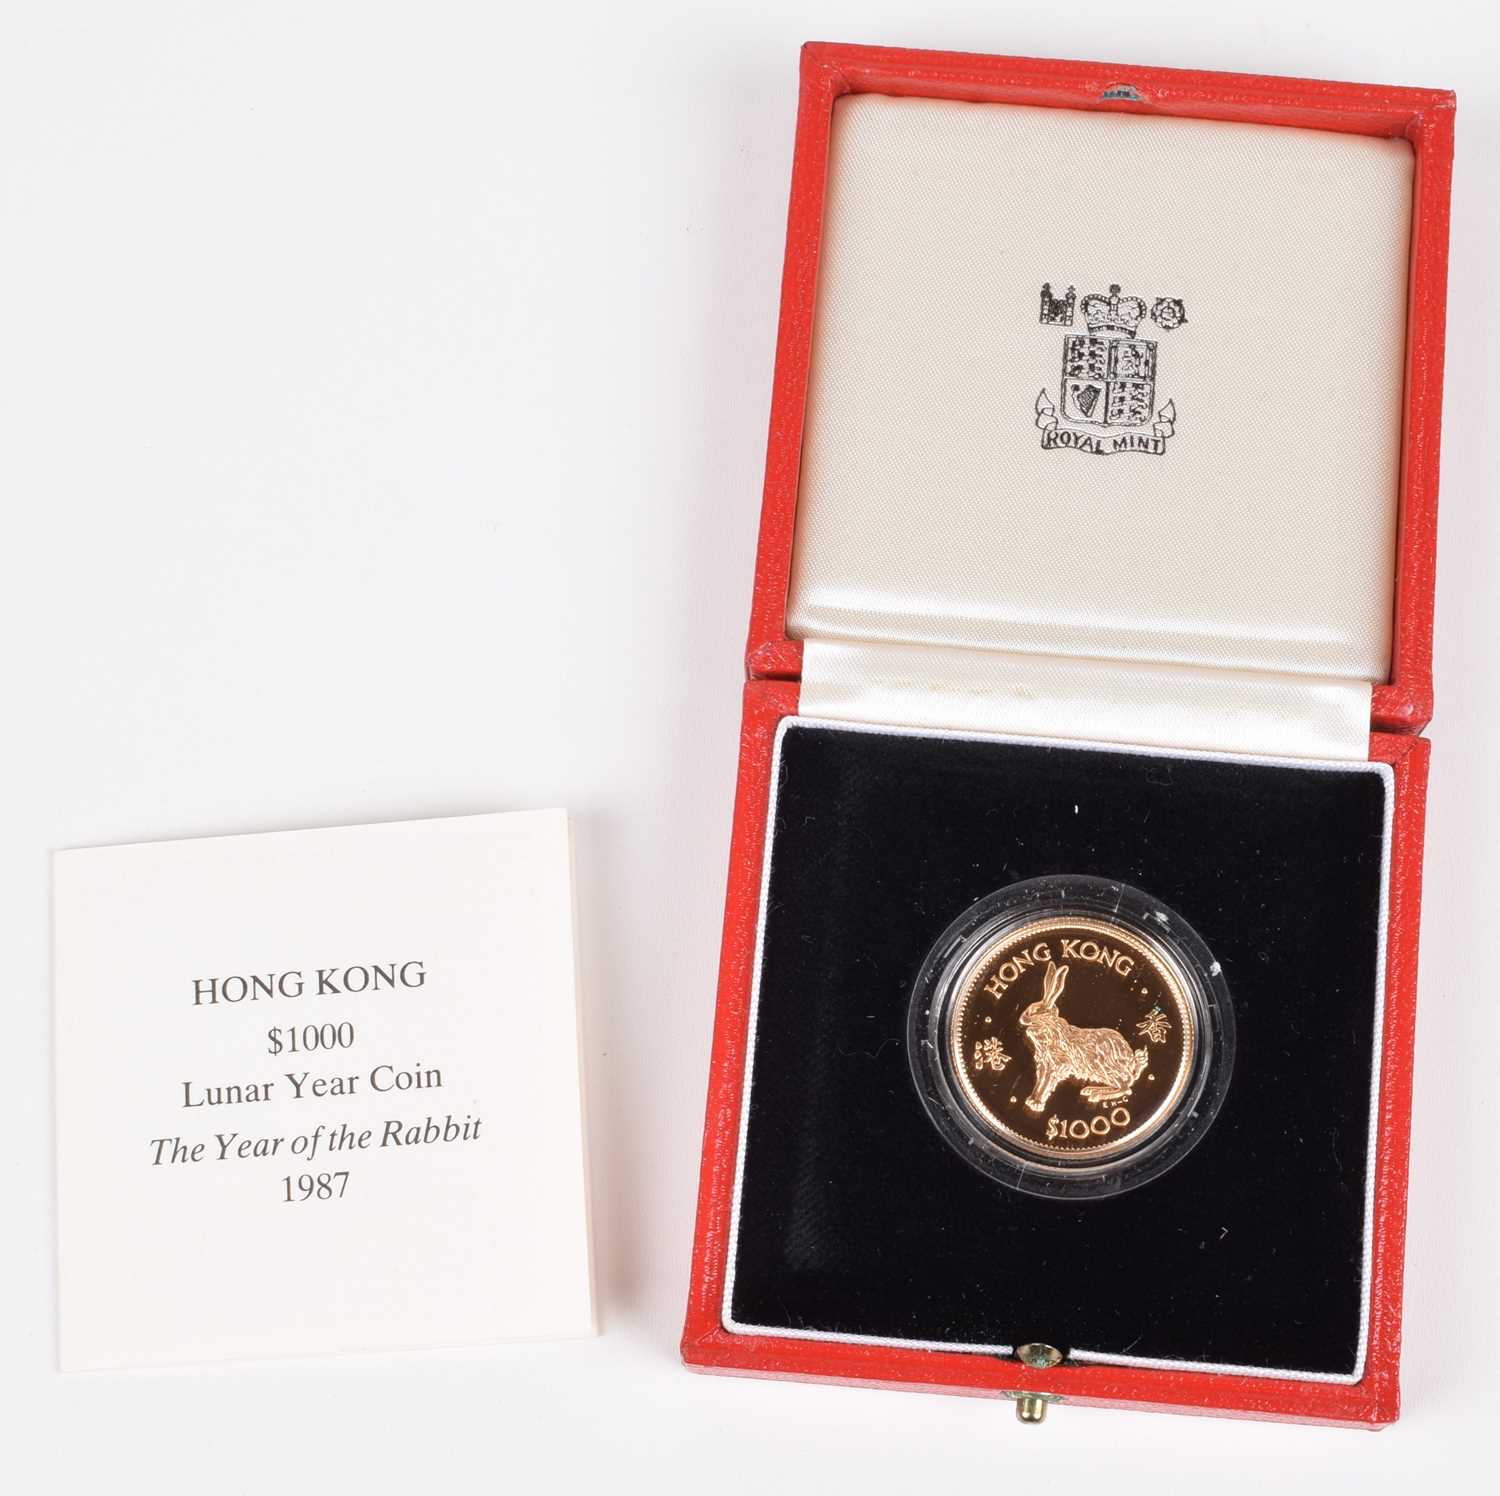 Lot 70 - Queen Elizabeth II, Hong Kong, $1000 Lunar Year Gold Proof Coin, 1987, The Year of the Rabbit.